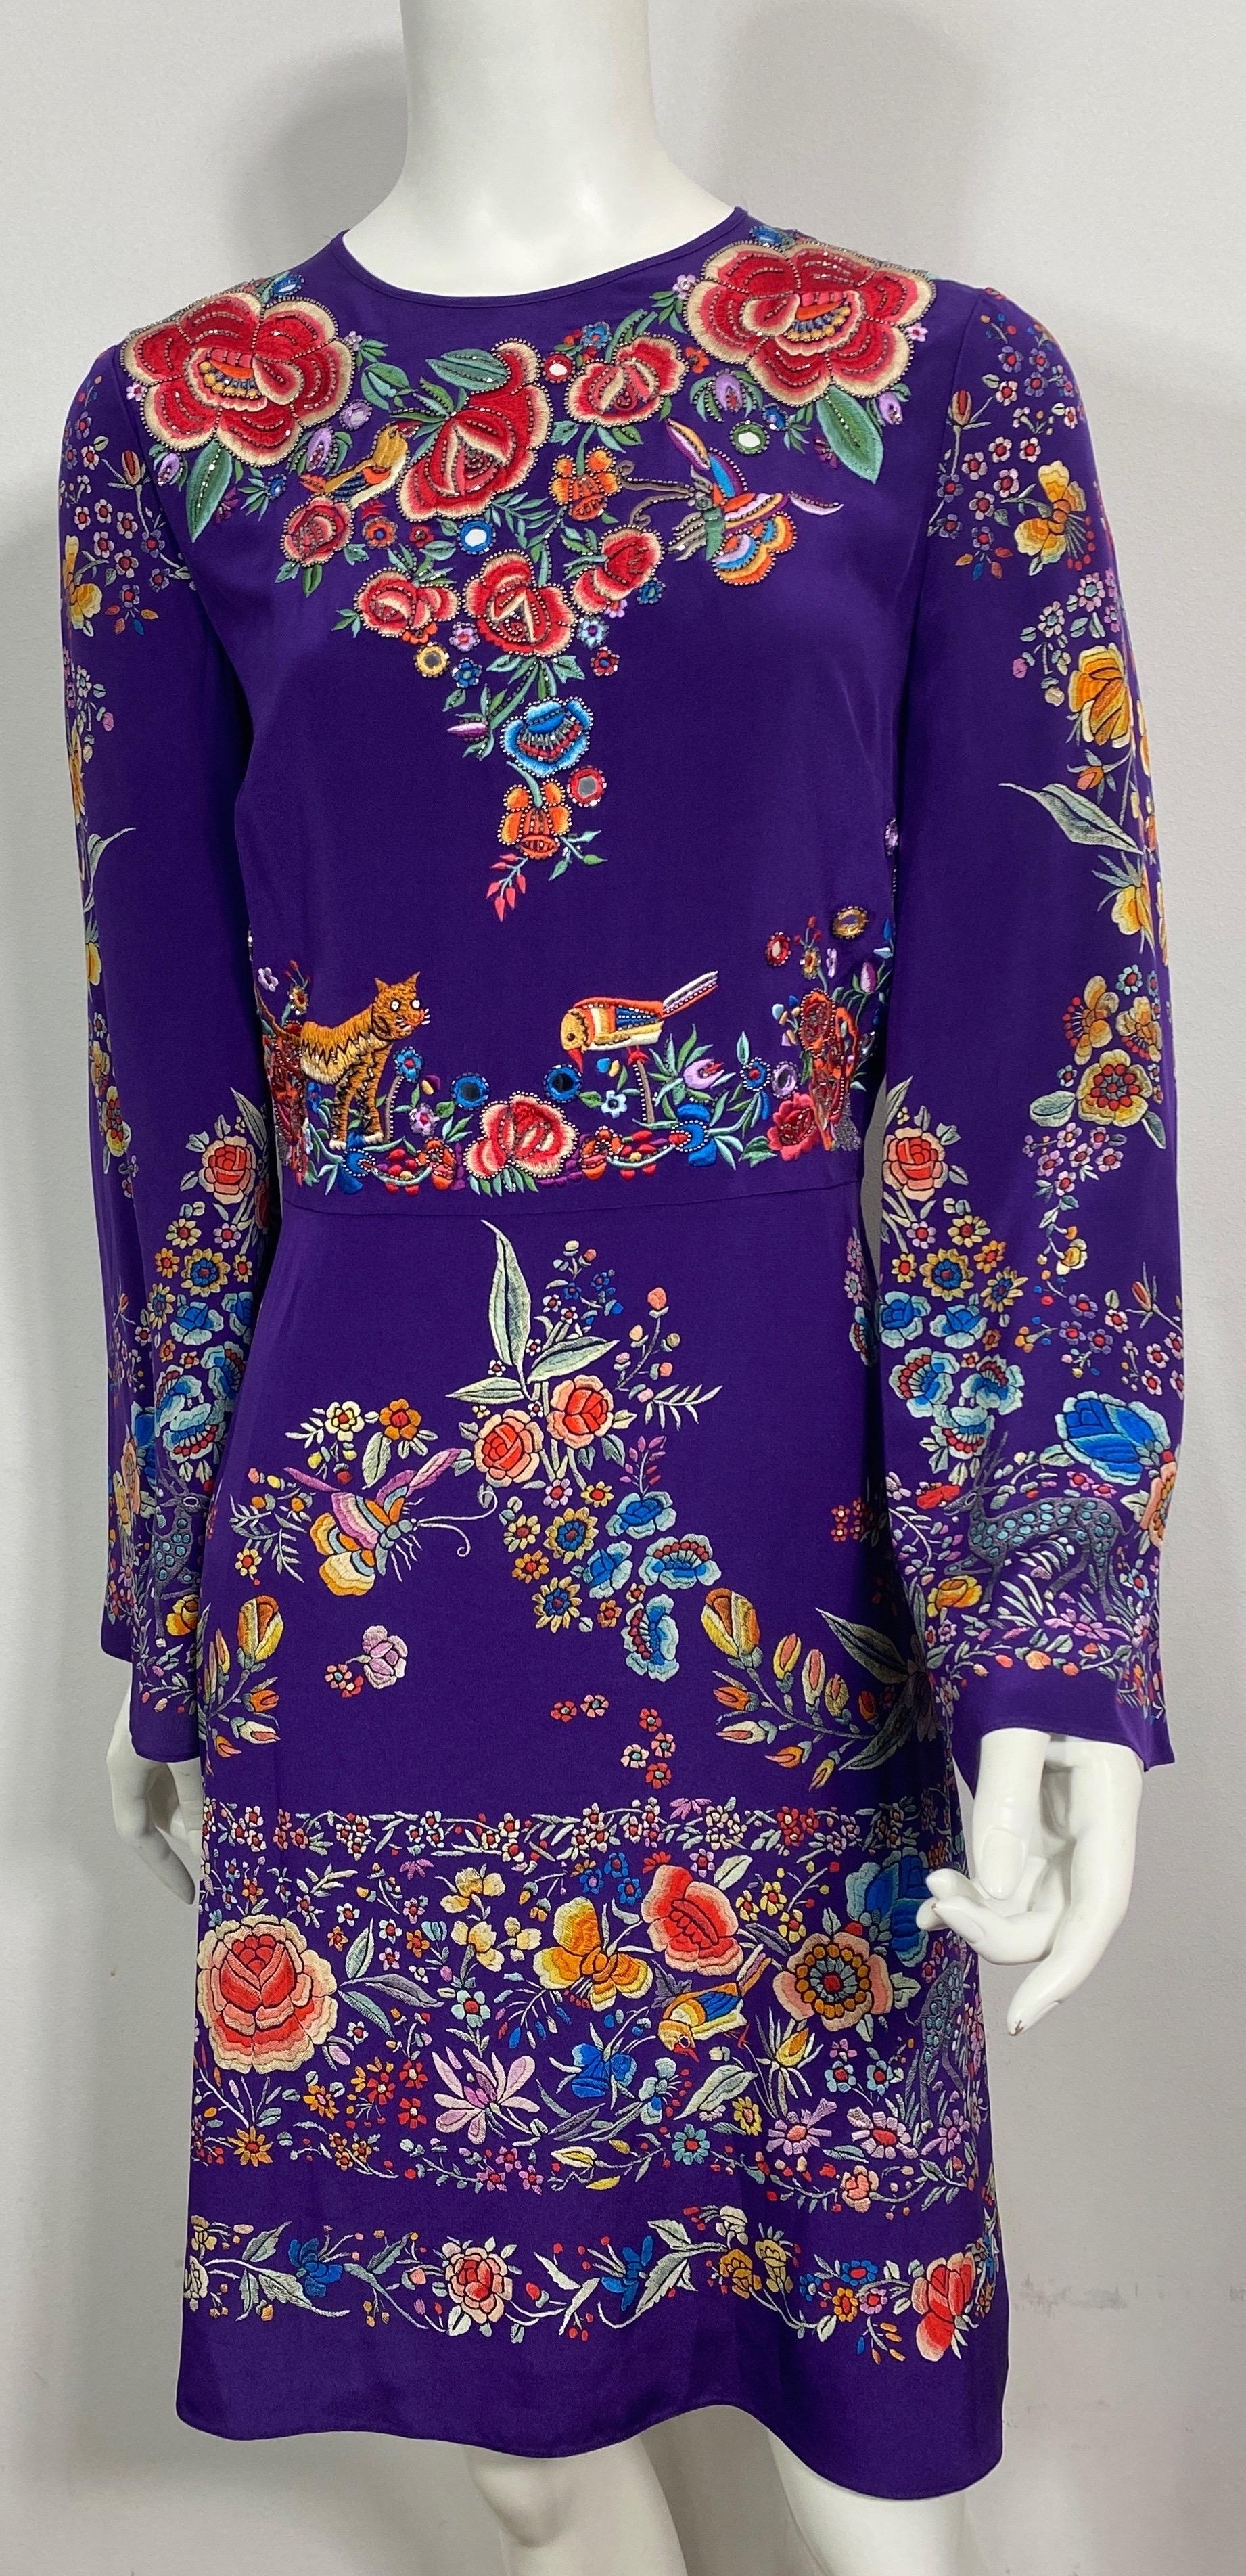 Roberto Cavalli Resort 2017 Purple Multi Embroidered Silk Dress-Size 40 This purple silk print long sleeve dress has a pattern of flowers and bees, birds and cats in multi vibrant colors. The front of the dress has multiple areas with embroidery